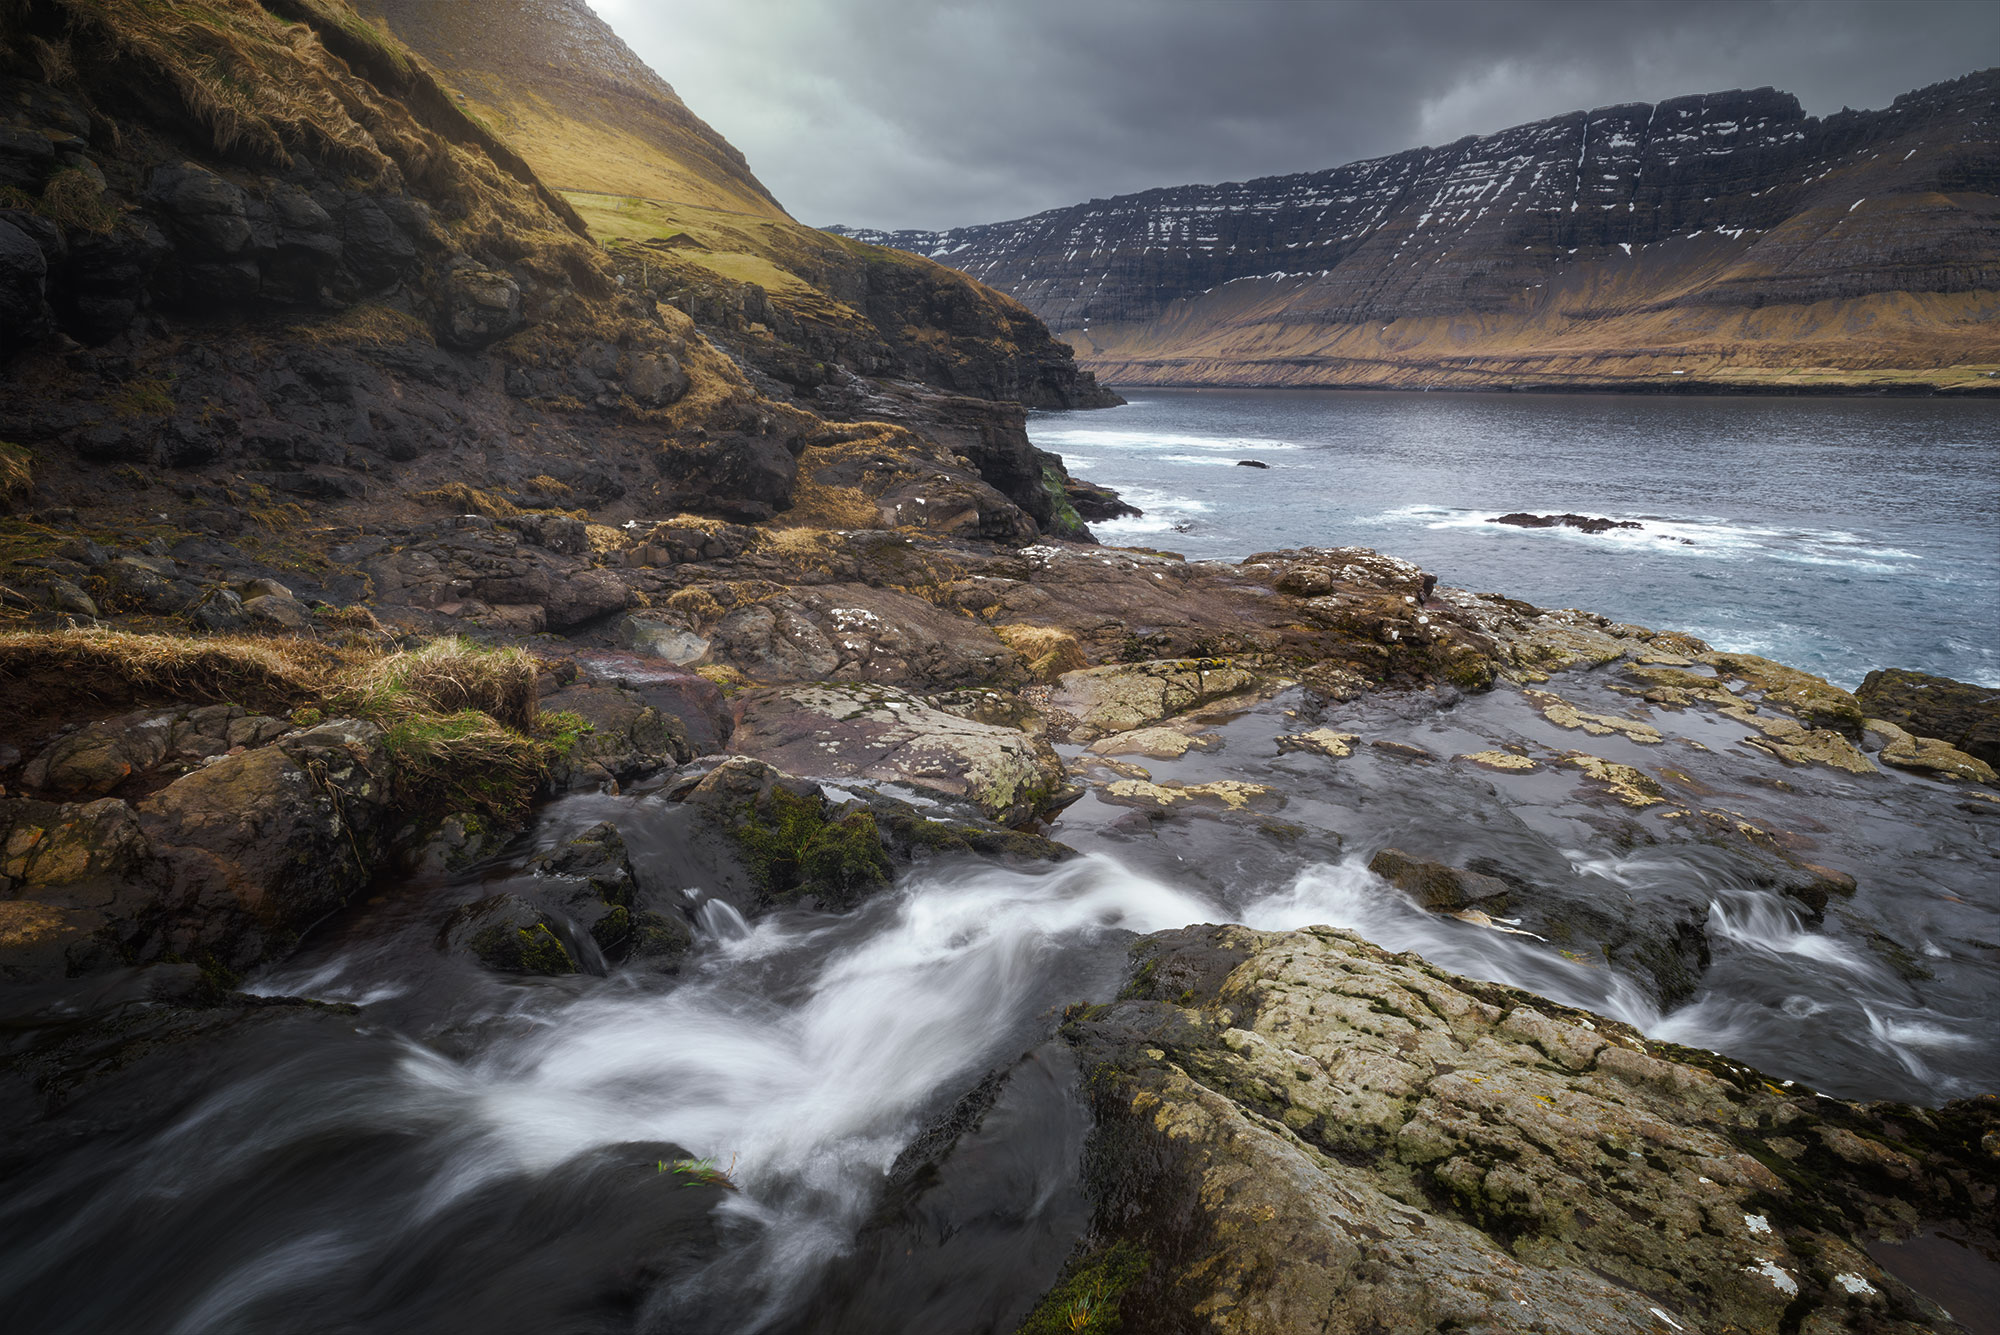 Experience the captivating beauty of Viðoy Island in the Faroe Islands through the lens of long exposure landscape photography. This stunning image captures the serene flow of a river as it meanders from the picturesque village of Viðareiði to the expansive ocean. Immerse yourself in the tranquil atmosphere of this remote island destination, where rugged cliffs meet the soothing waters below. Explore the dynamic movement captured in this long exposure photograph, offering a glimpse into the timeless charm of Viðoy Island's natural landscapes.